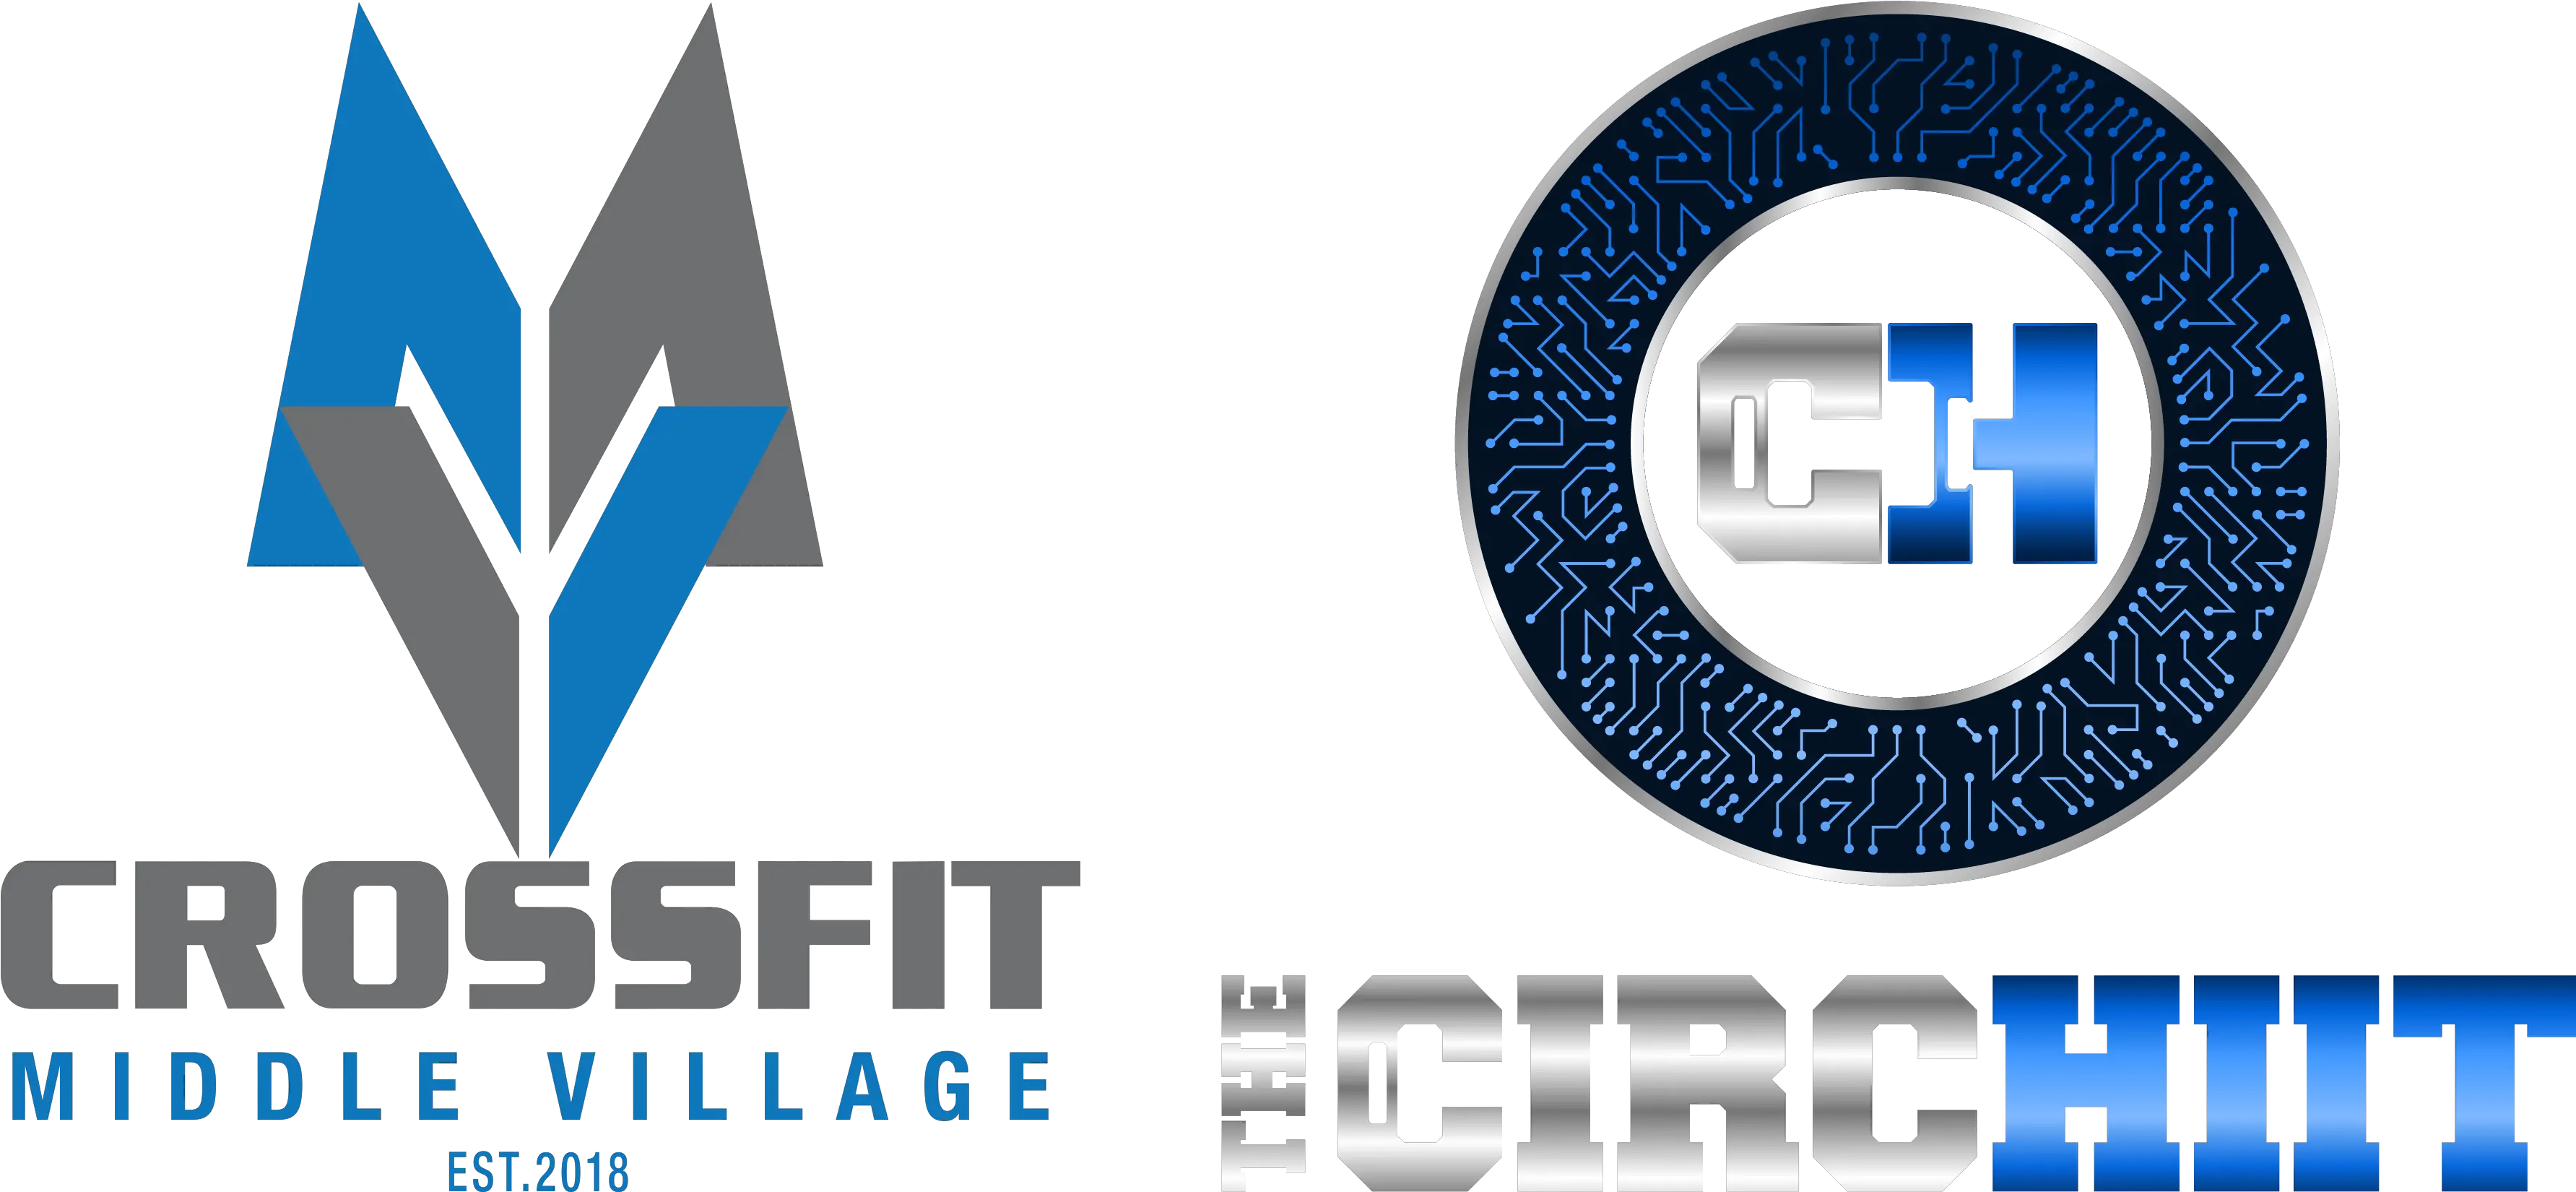 Homepage Crossfit Middle Village And The Circhiit Graphic Design Png Gym Logos